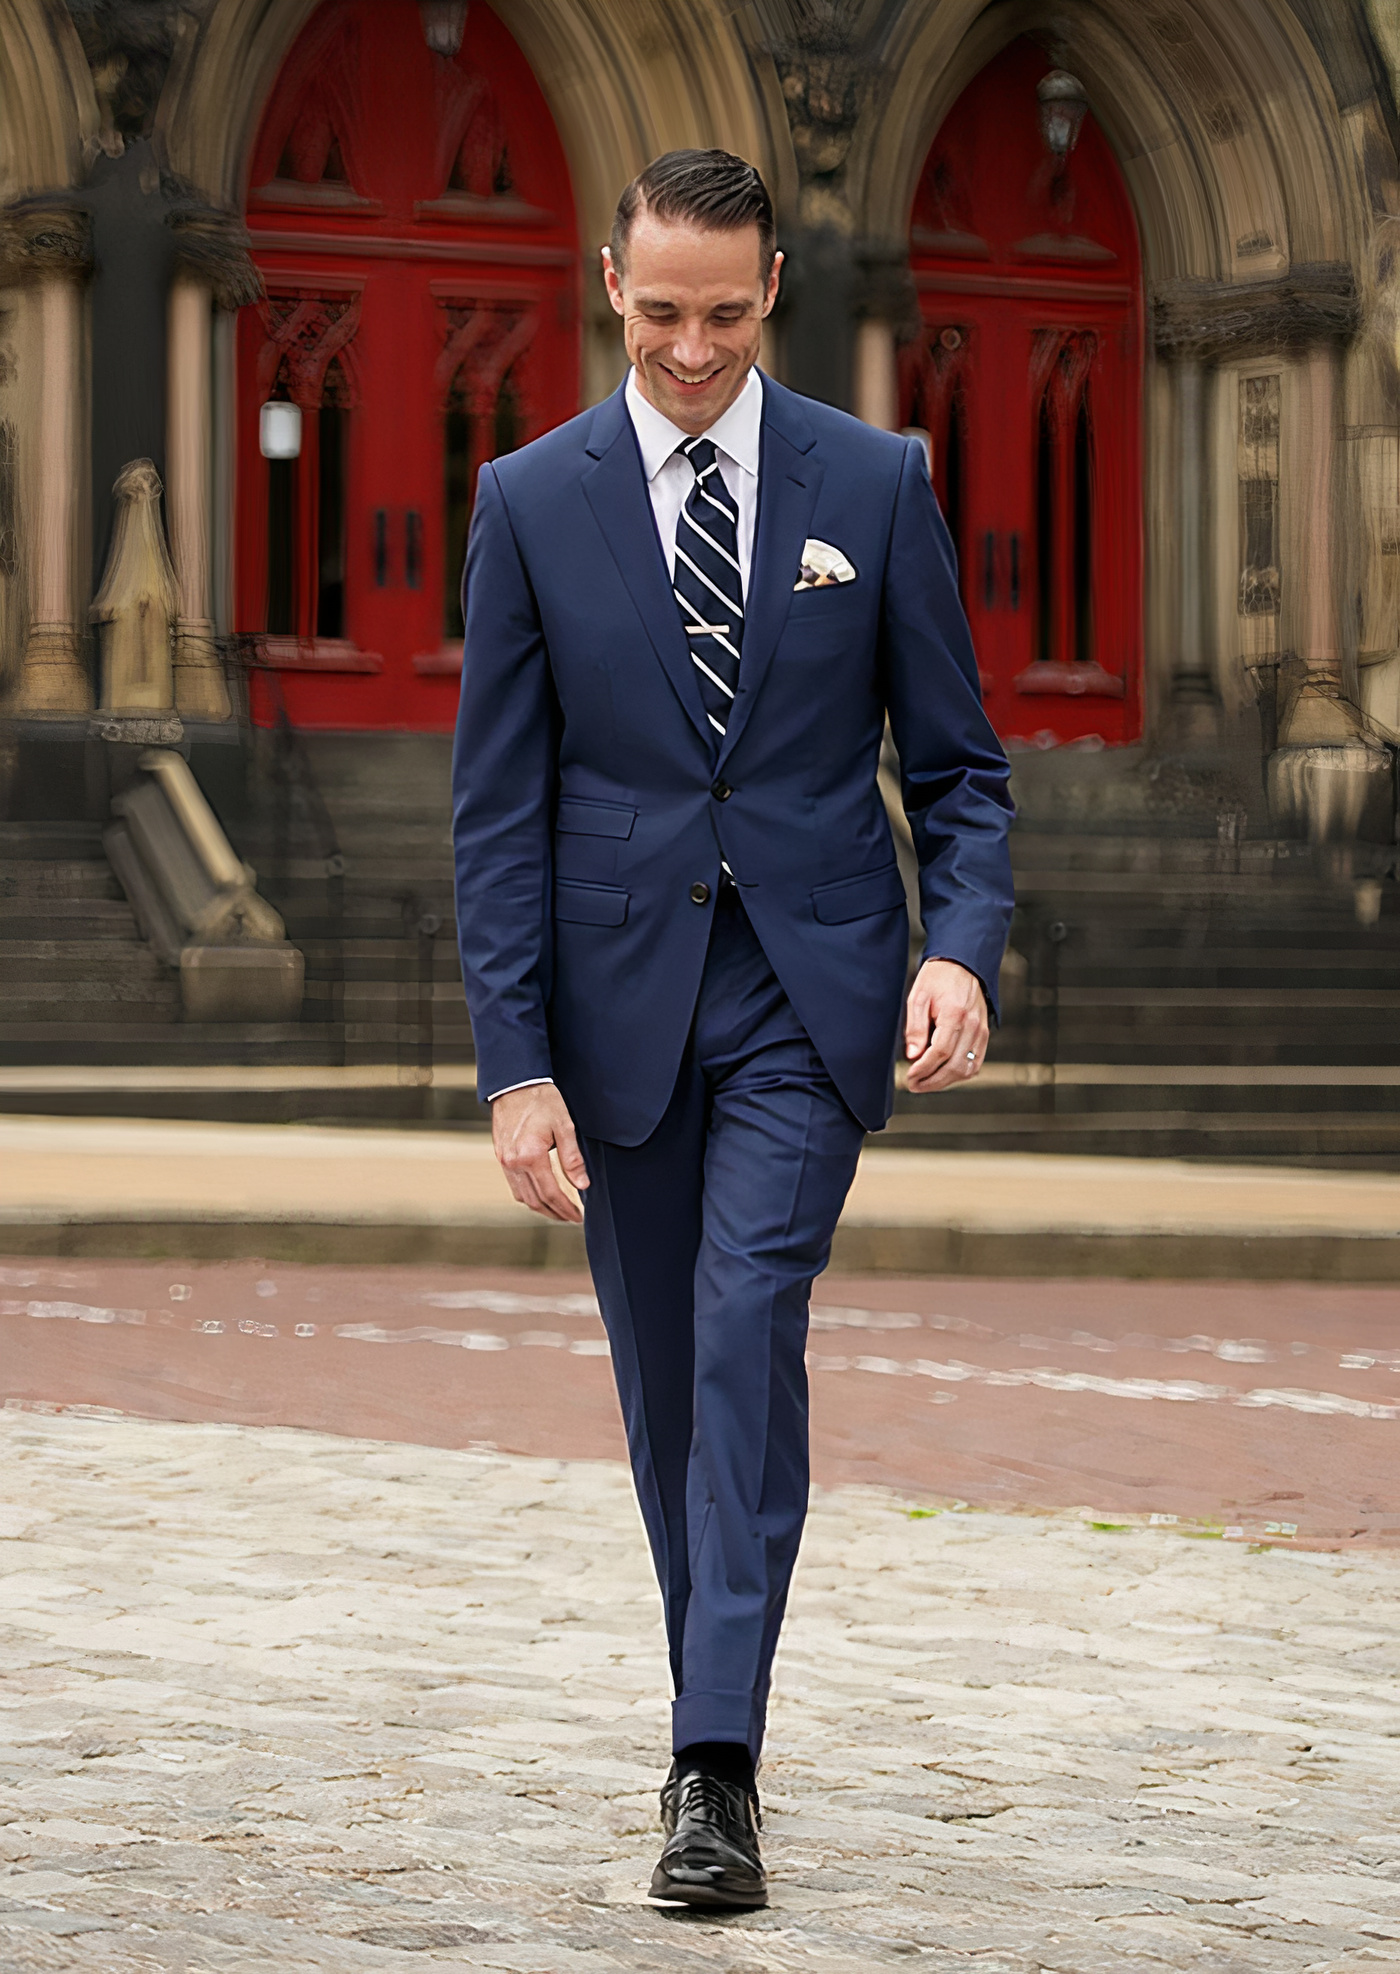 Navy suit, white button-up shirt, and black oxford shoes